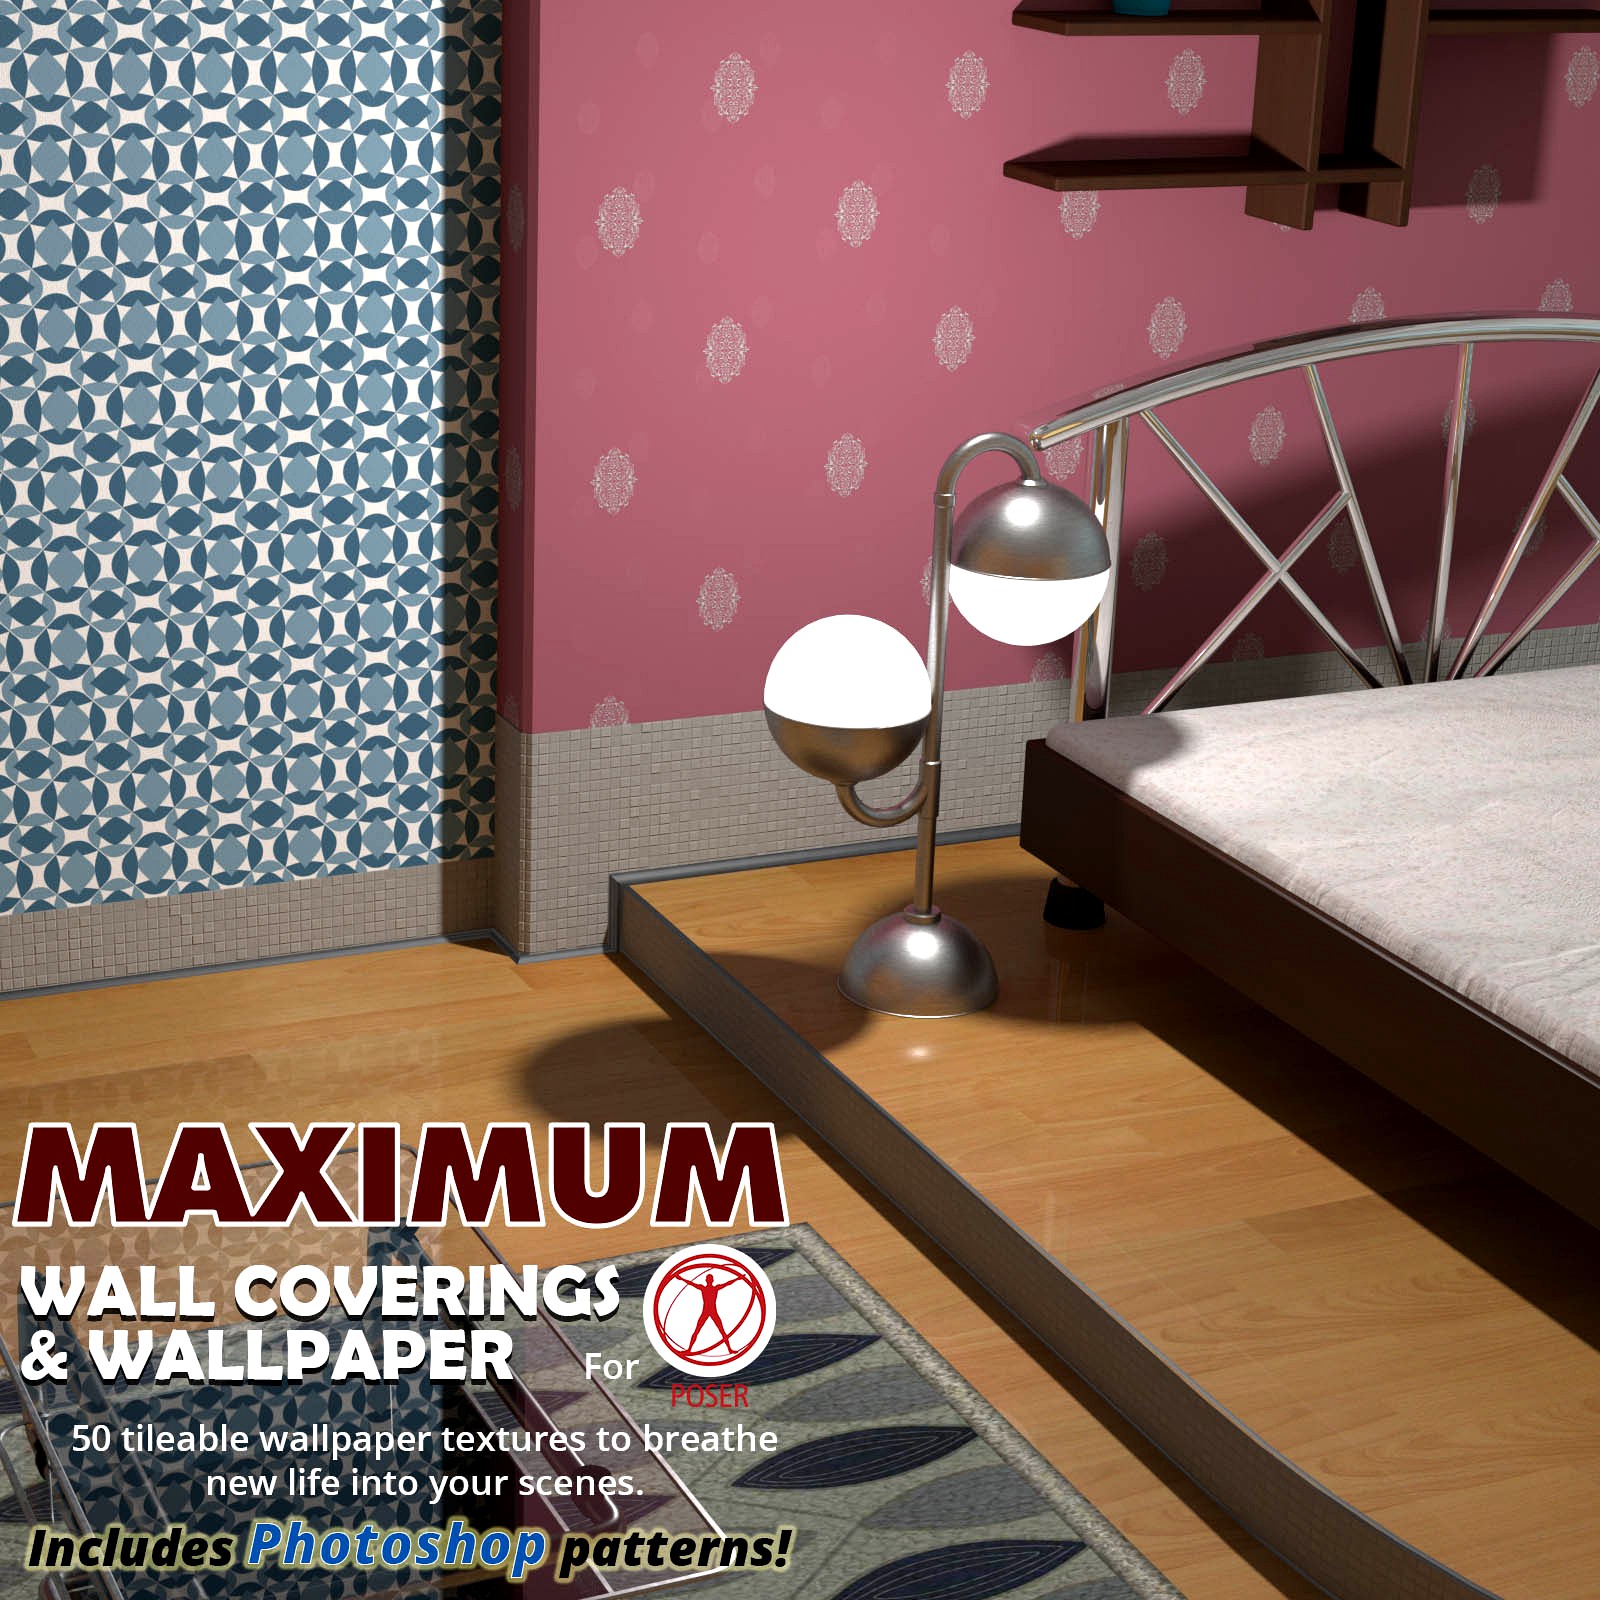 Maximum wall coverings and wallpaper for Poser